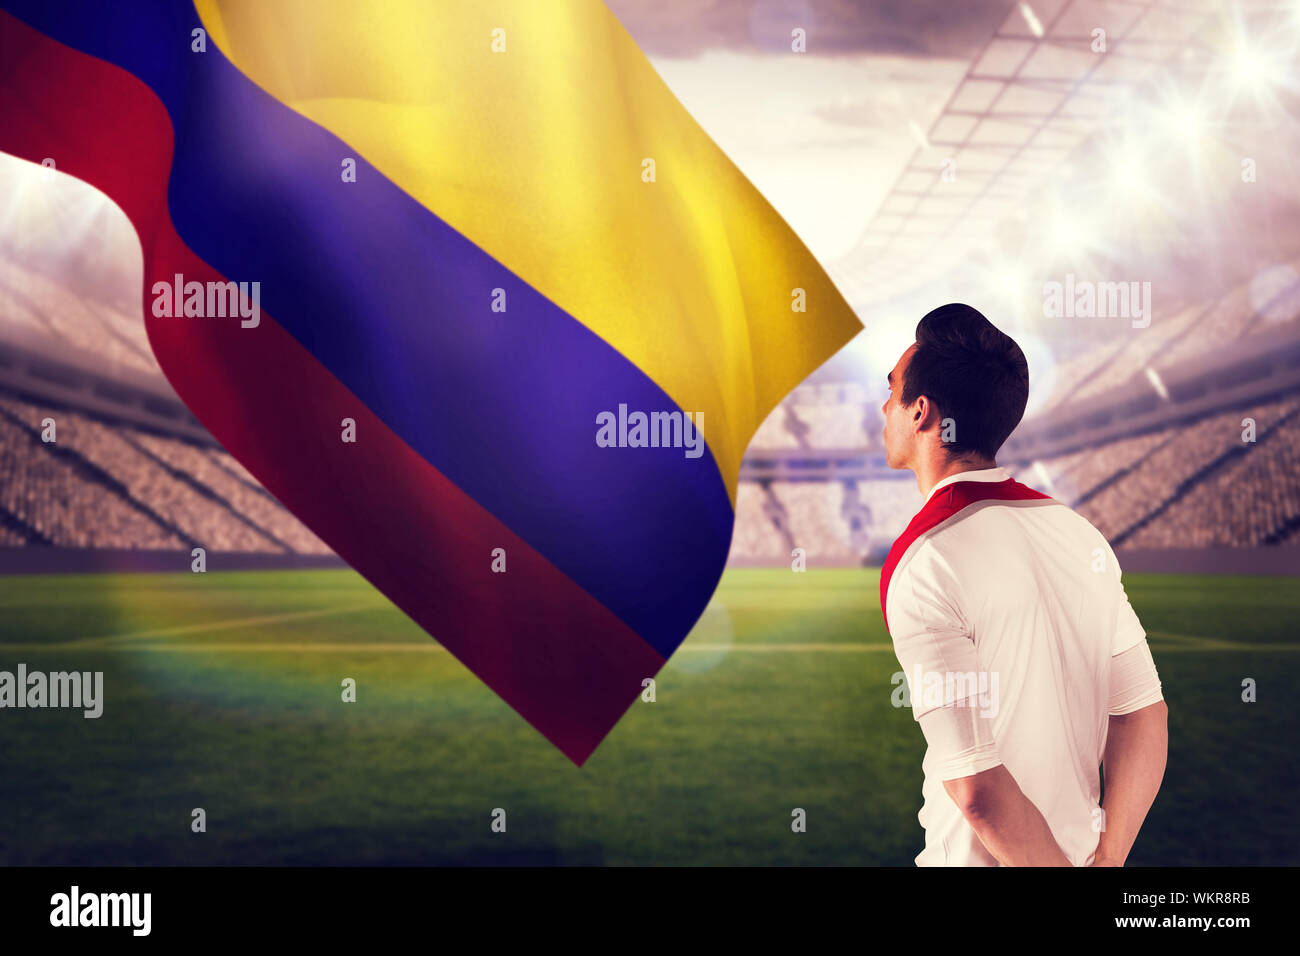 Handsome football fan looking ahead against large football stadium with lights Stock Photo